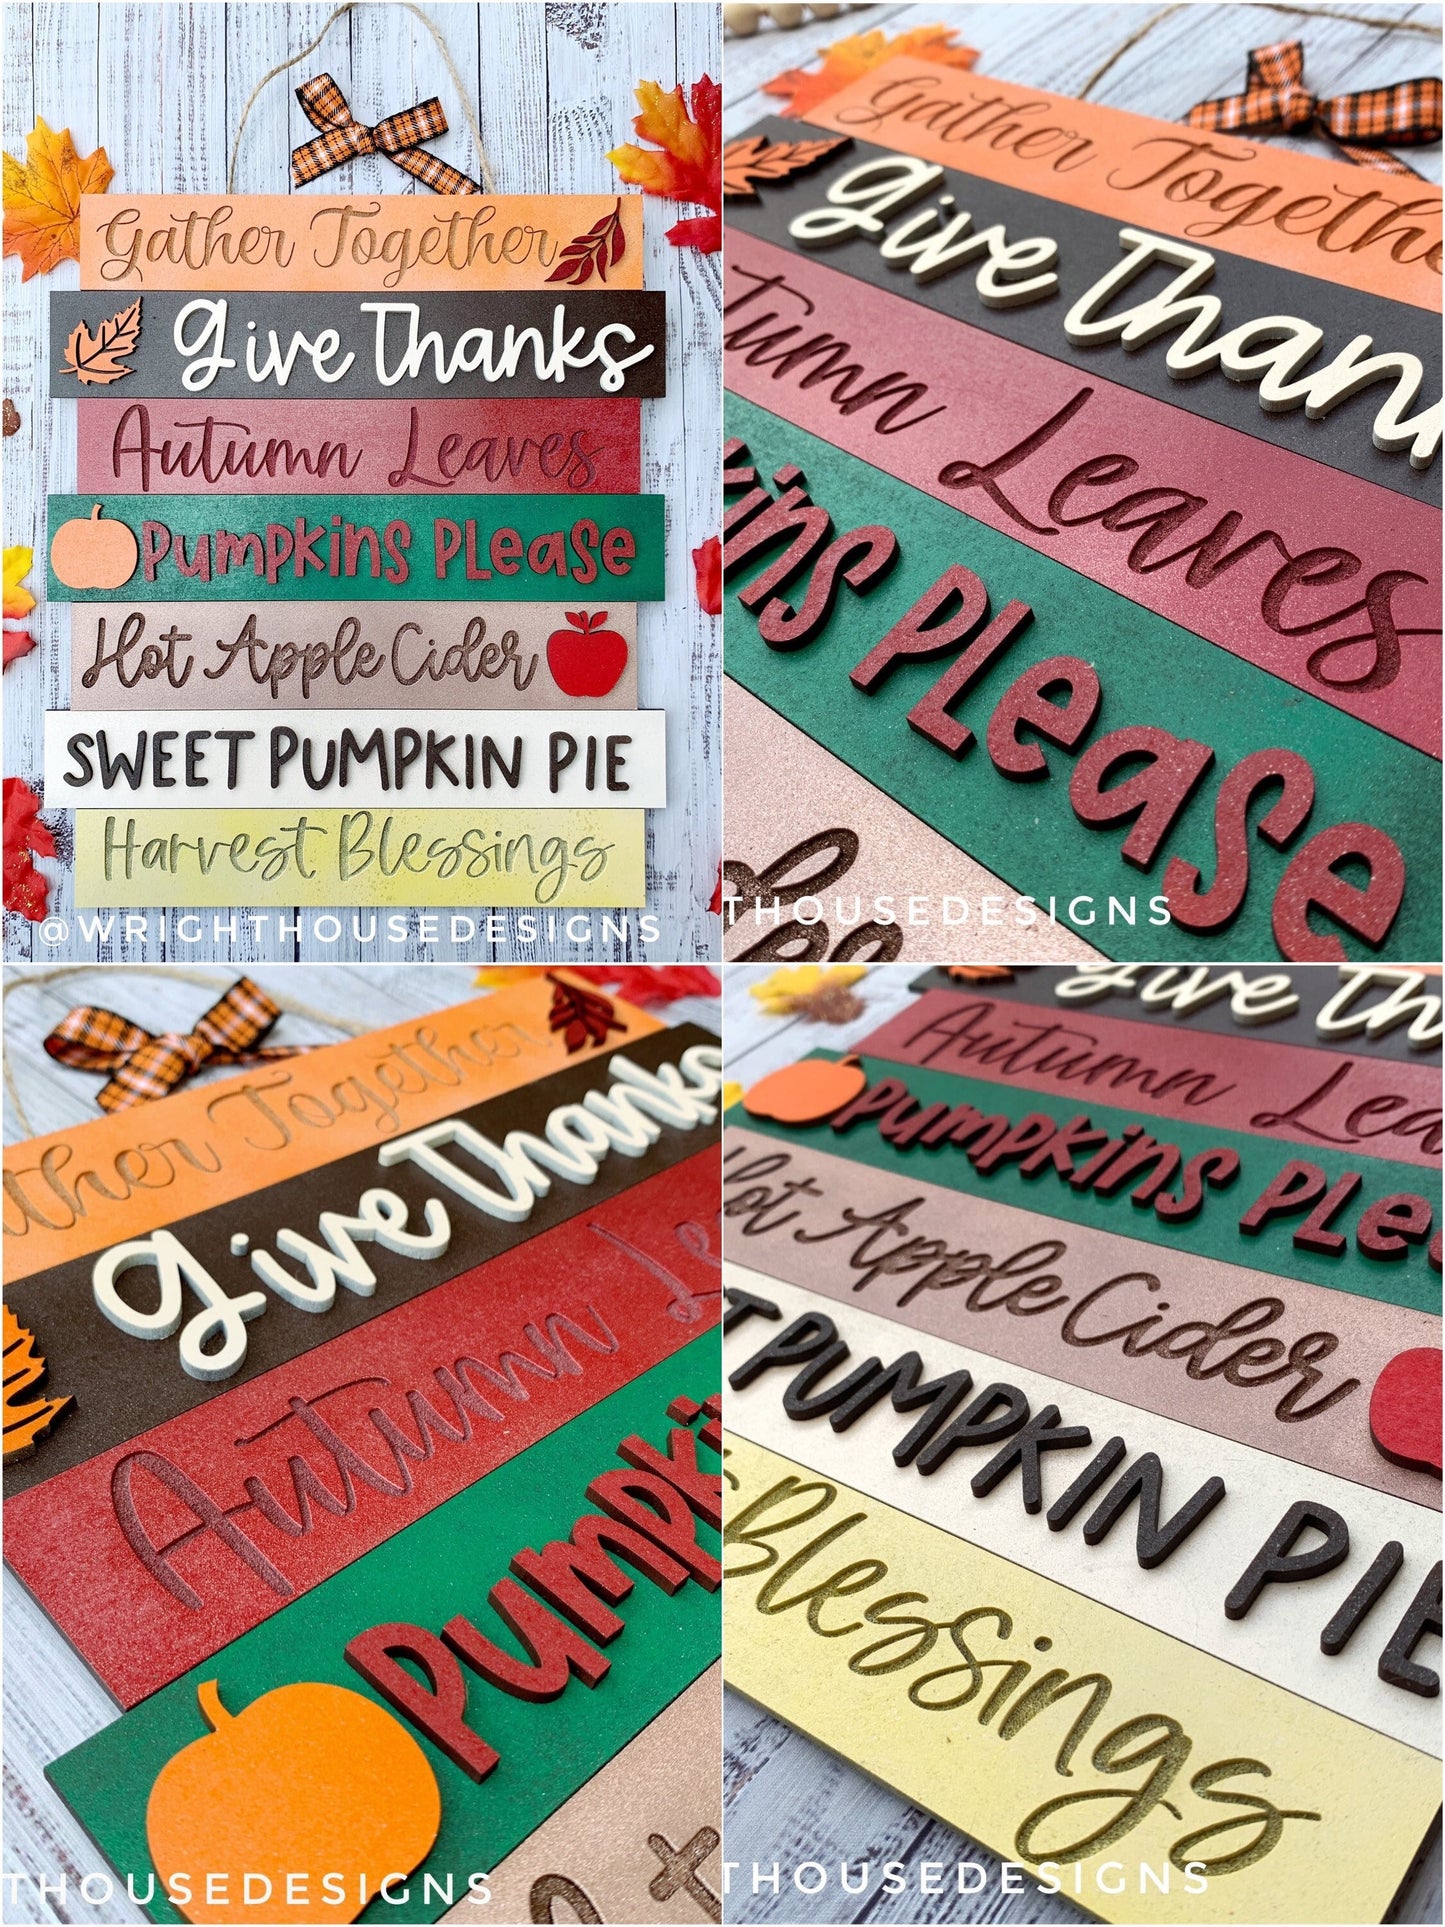 Gather Together Thanksgiving Bucket List Stacked Sign - Seasonal Wall Decor and DIY Kits - Cut File For Glowforge Lasers - Digital SVG File